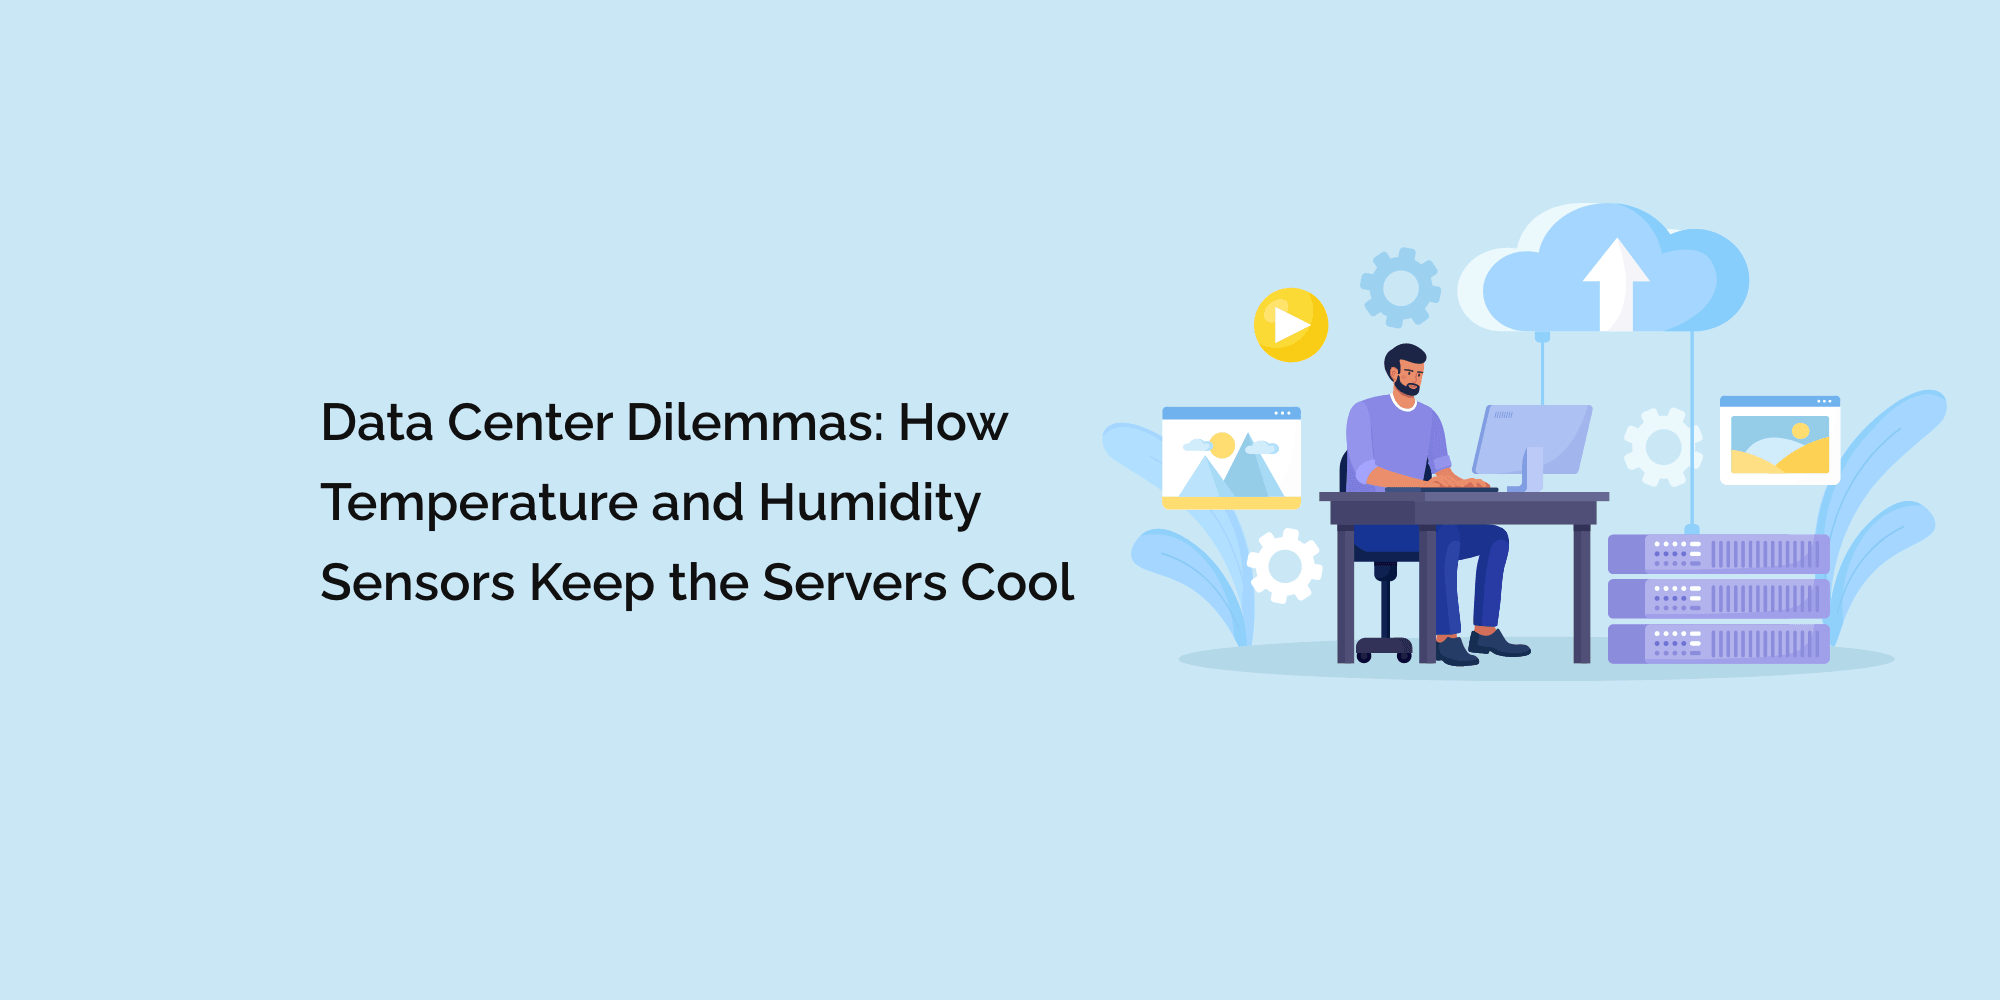 Data Center Dilemmas: How Temperature and Humidity Sensors Keep the Servers Cool